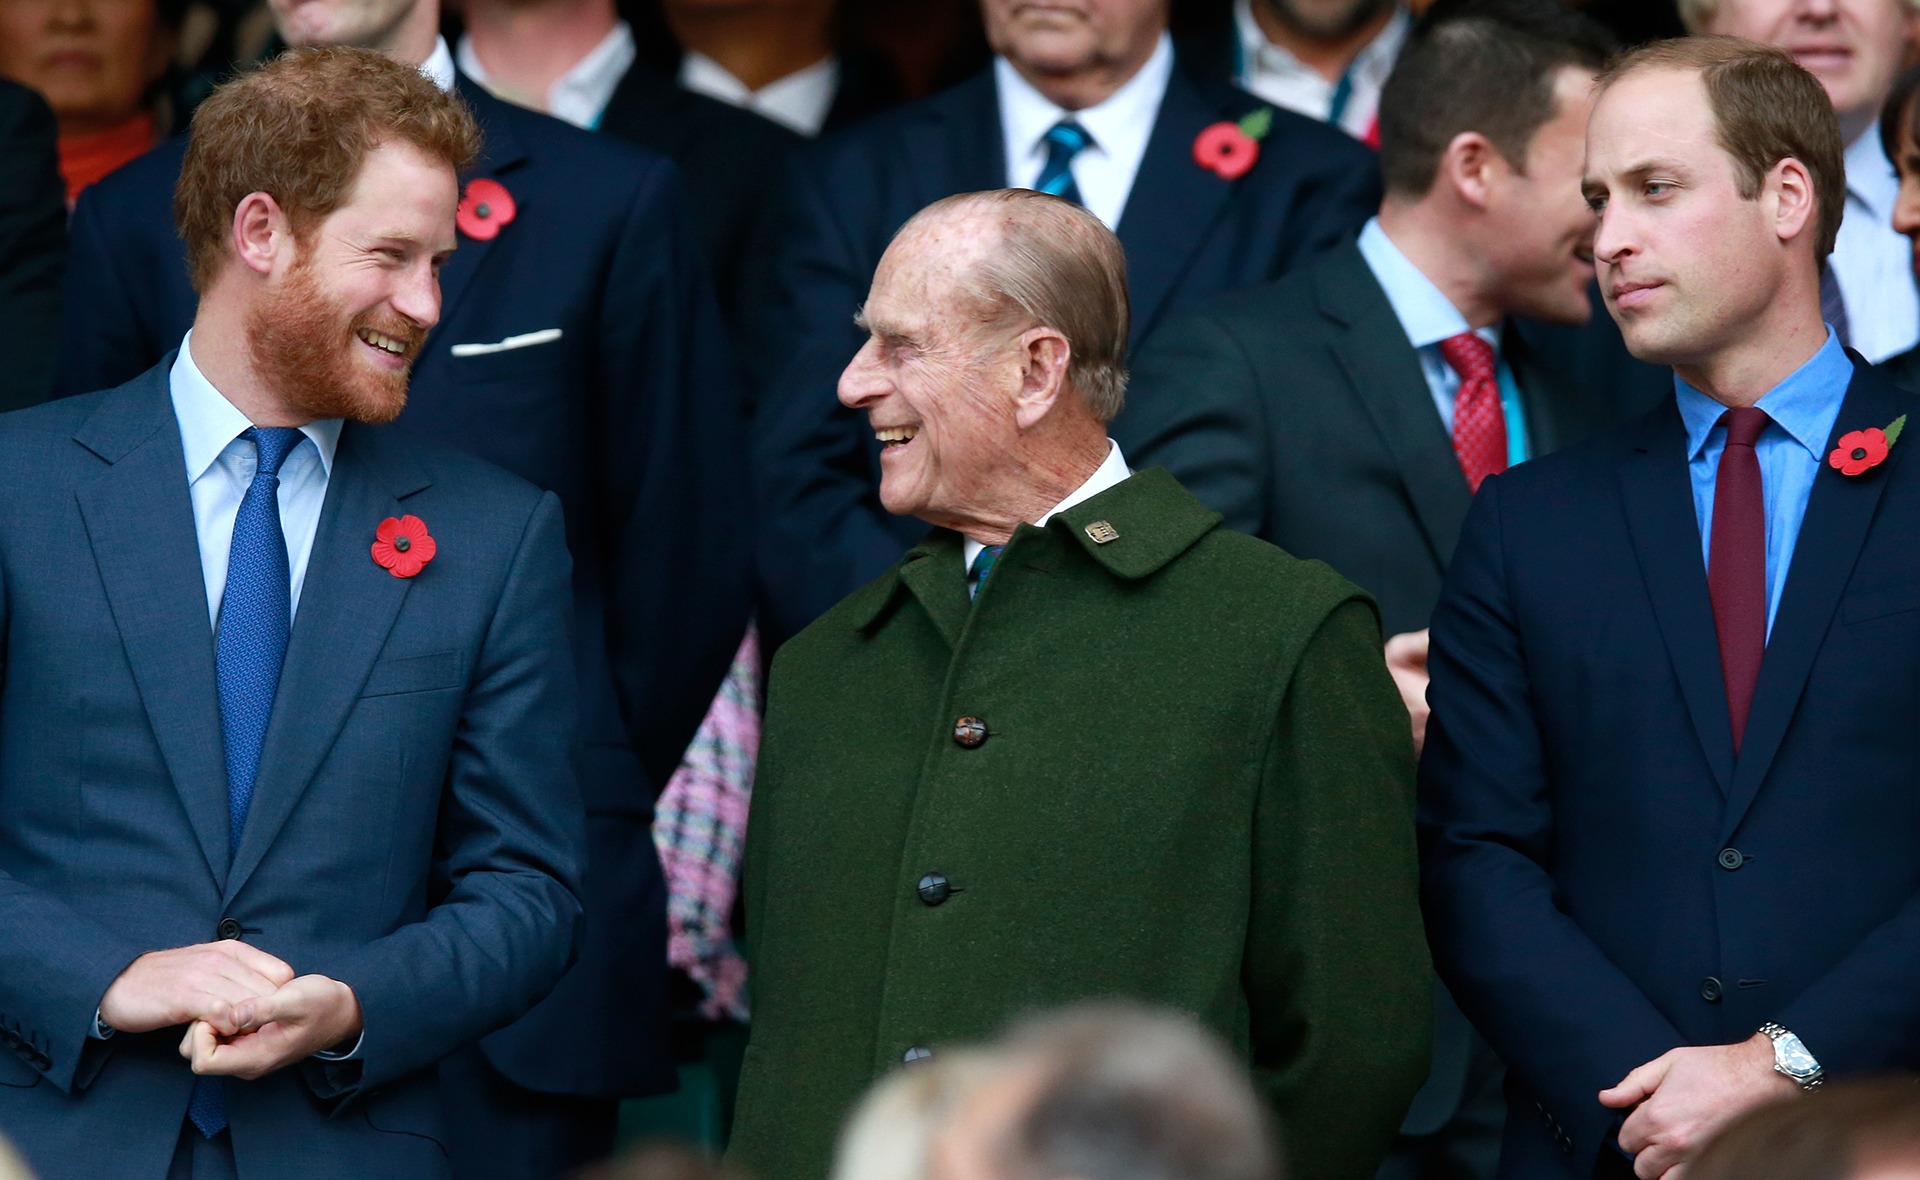 Prince Harry joins forces with the royals for an emotional tribute to the late Prince Philip